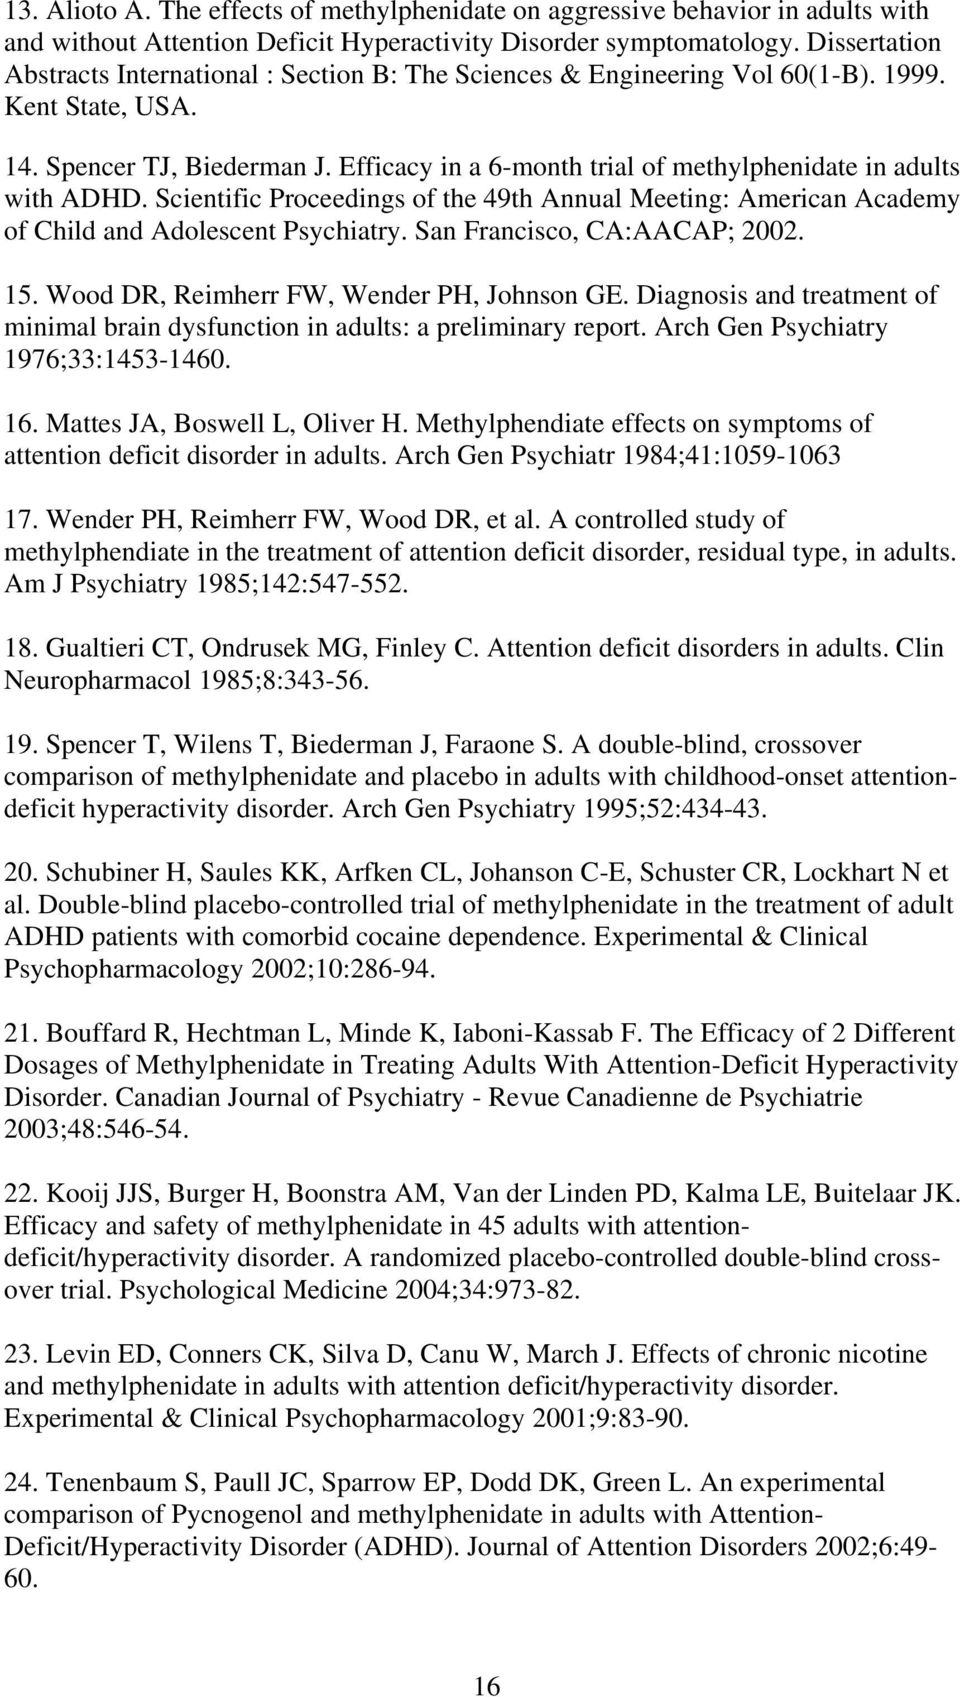 Efficacy in a 6-month trial of methylphenidate in adults with ADHD. Scientific Proceedings of the 49th Annual Meeting: American Academy of Child and Adolescent Psychiatry.